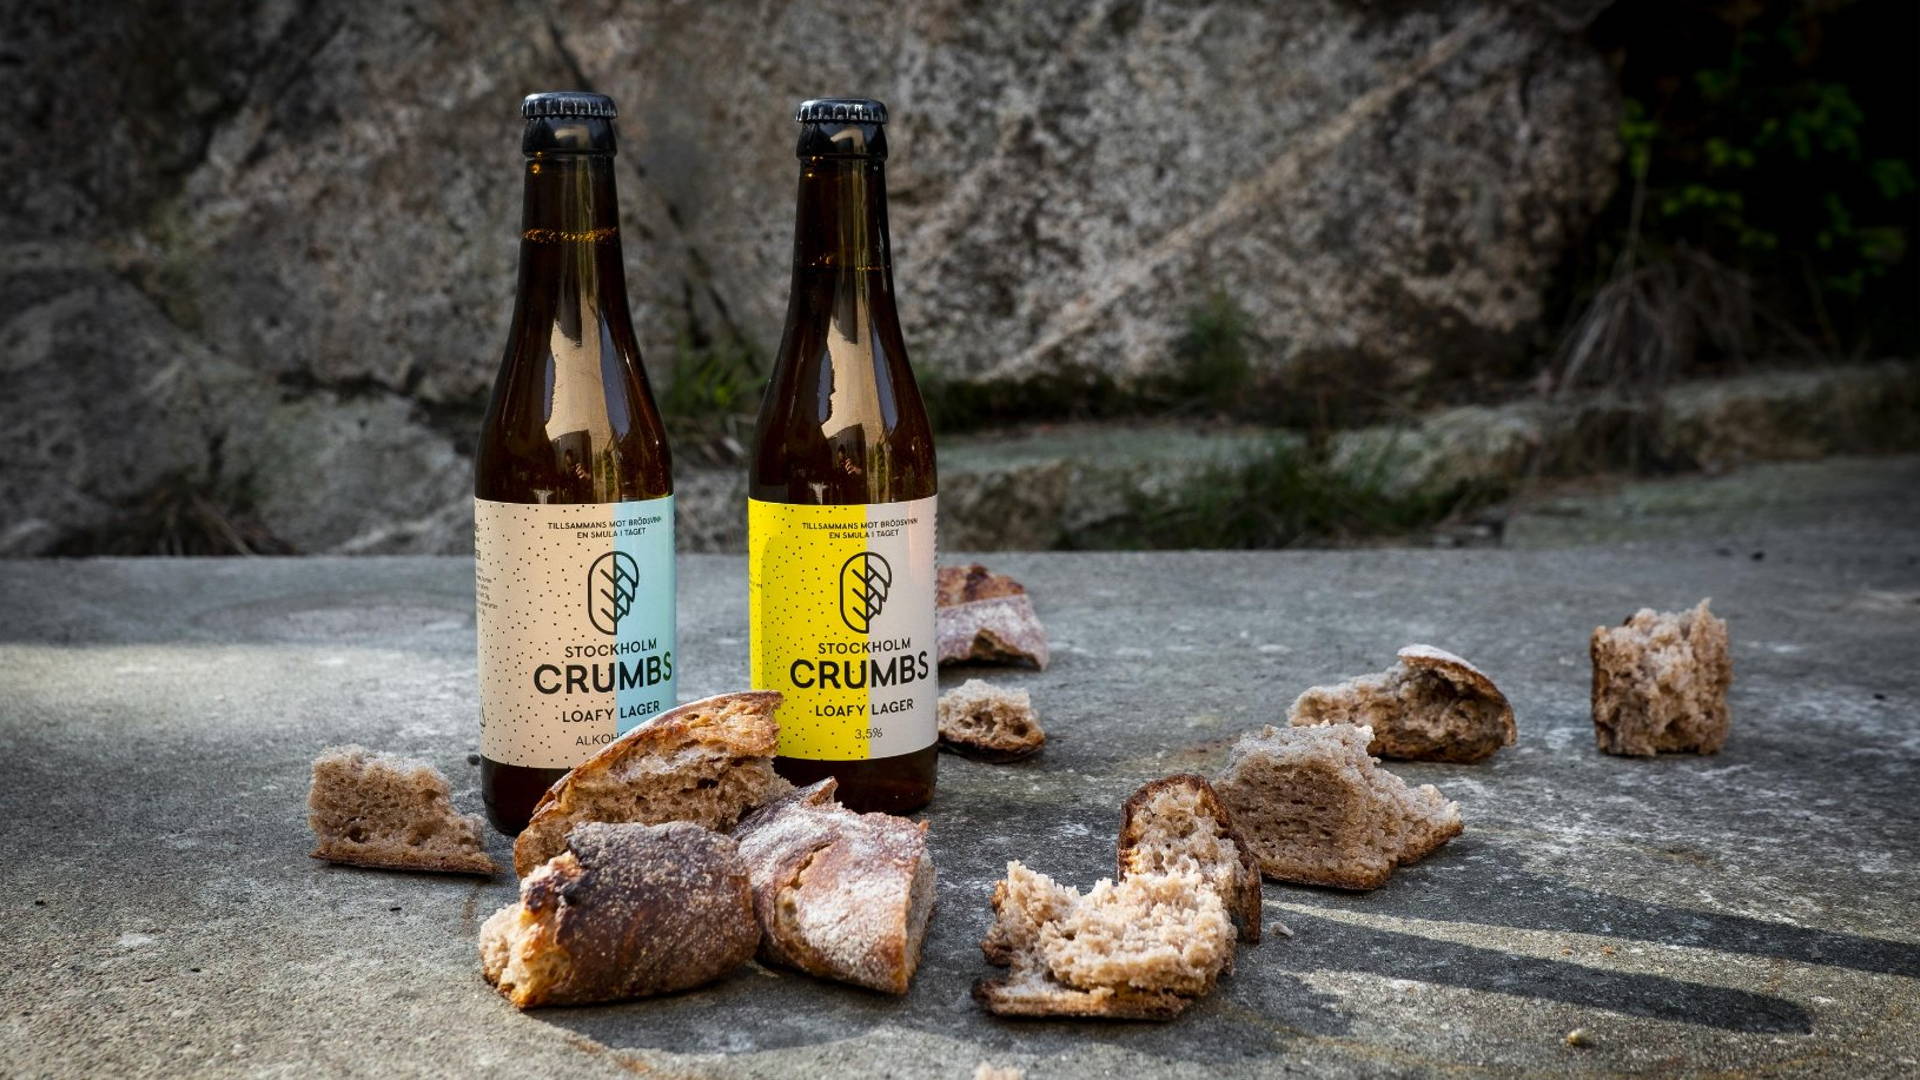 Featured image for Swedish Beer Brand Looks To Repurpose Bread Crumbs Into Beer